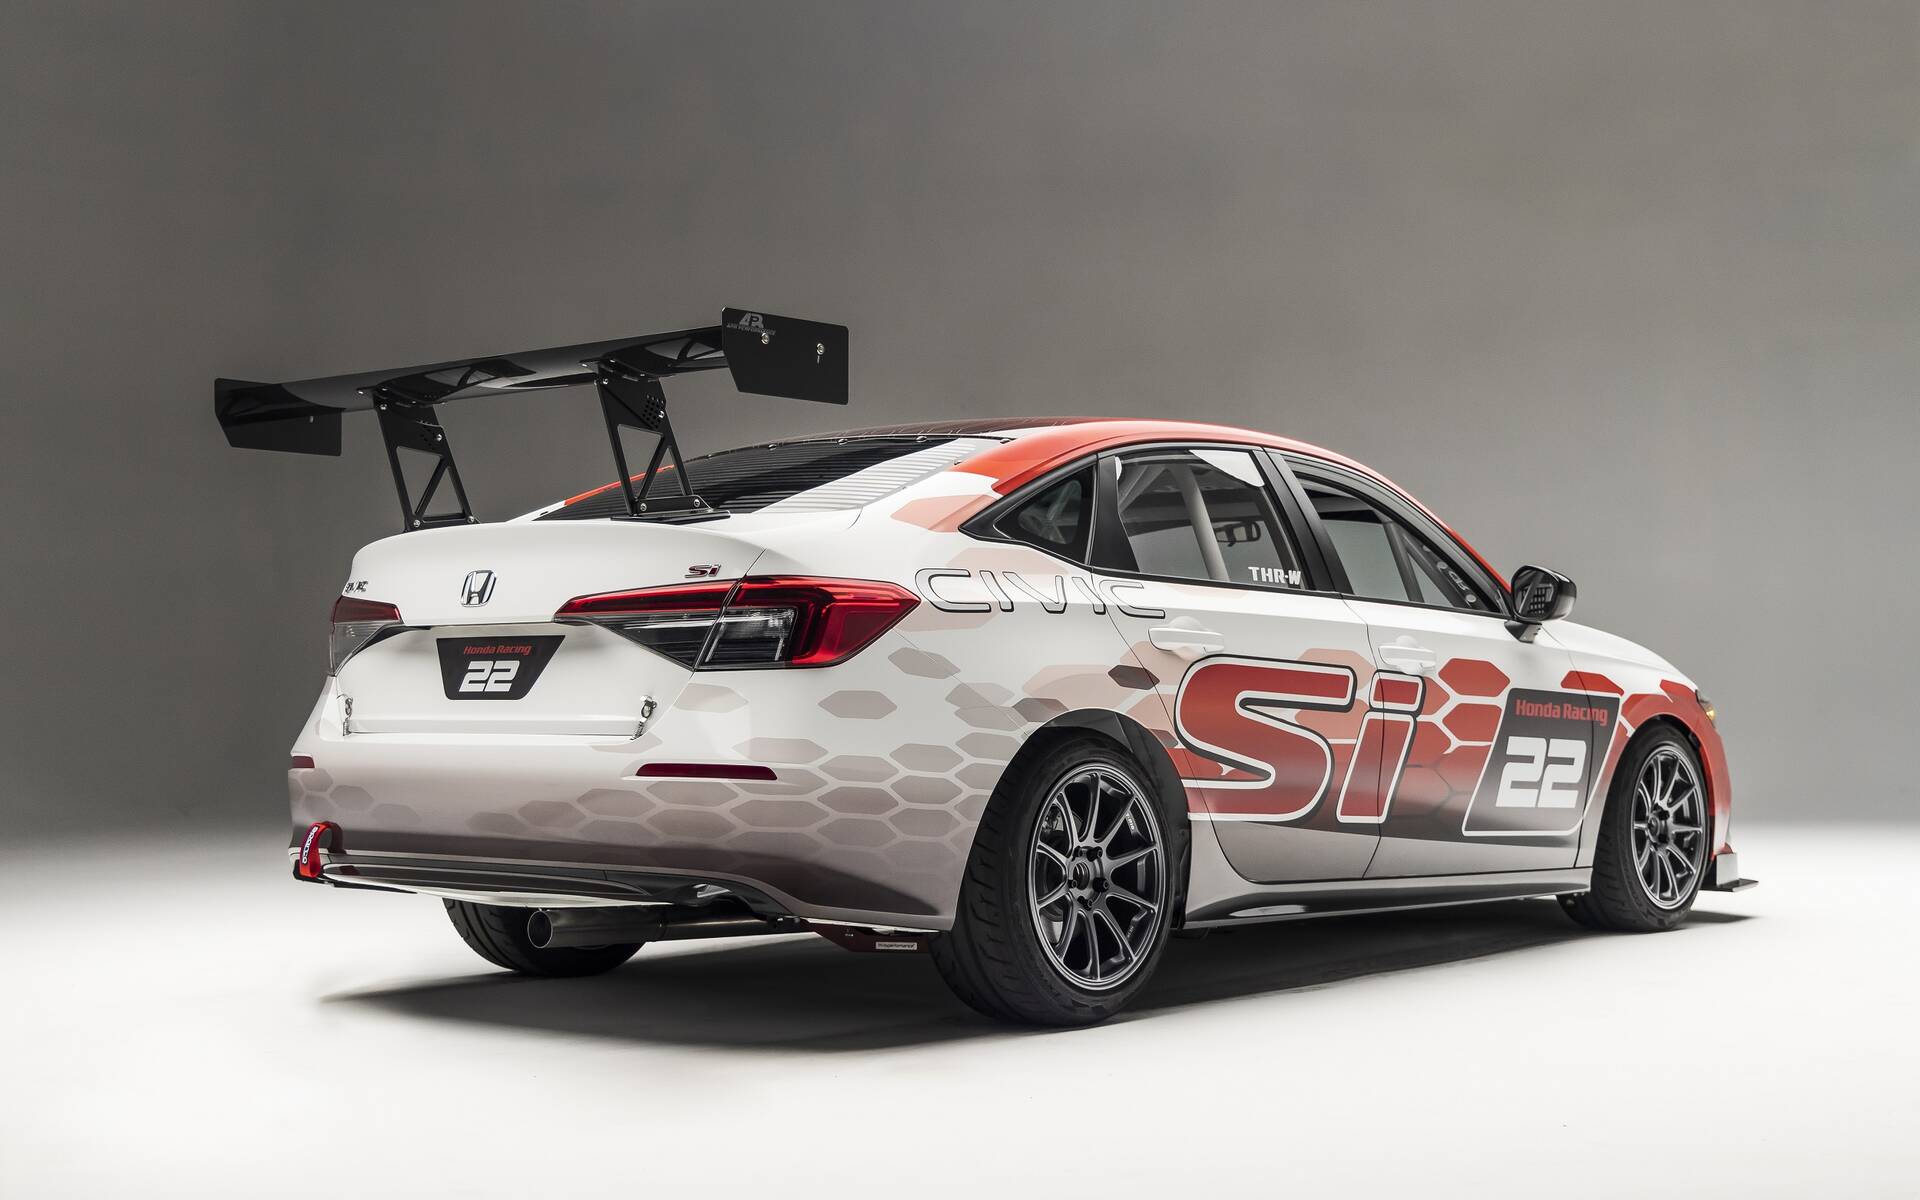 <p><strong>Team Honda Research West Civic Si Race Car</strong></p>